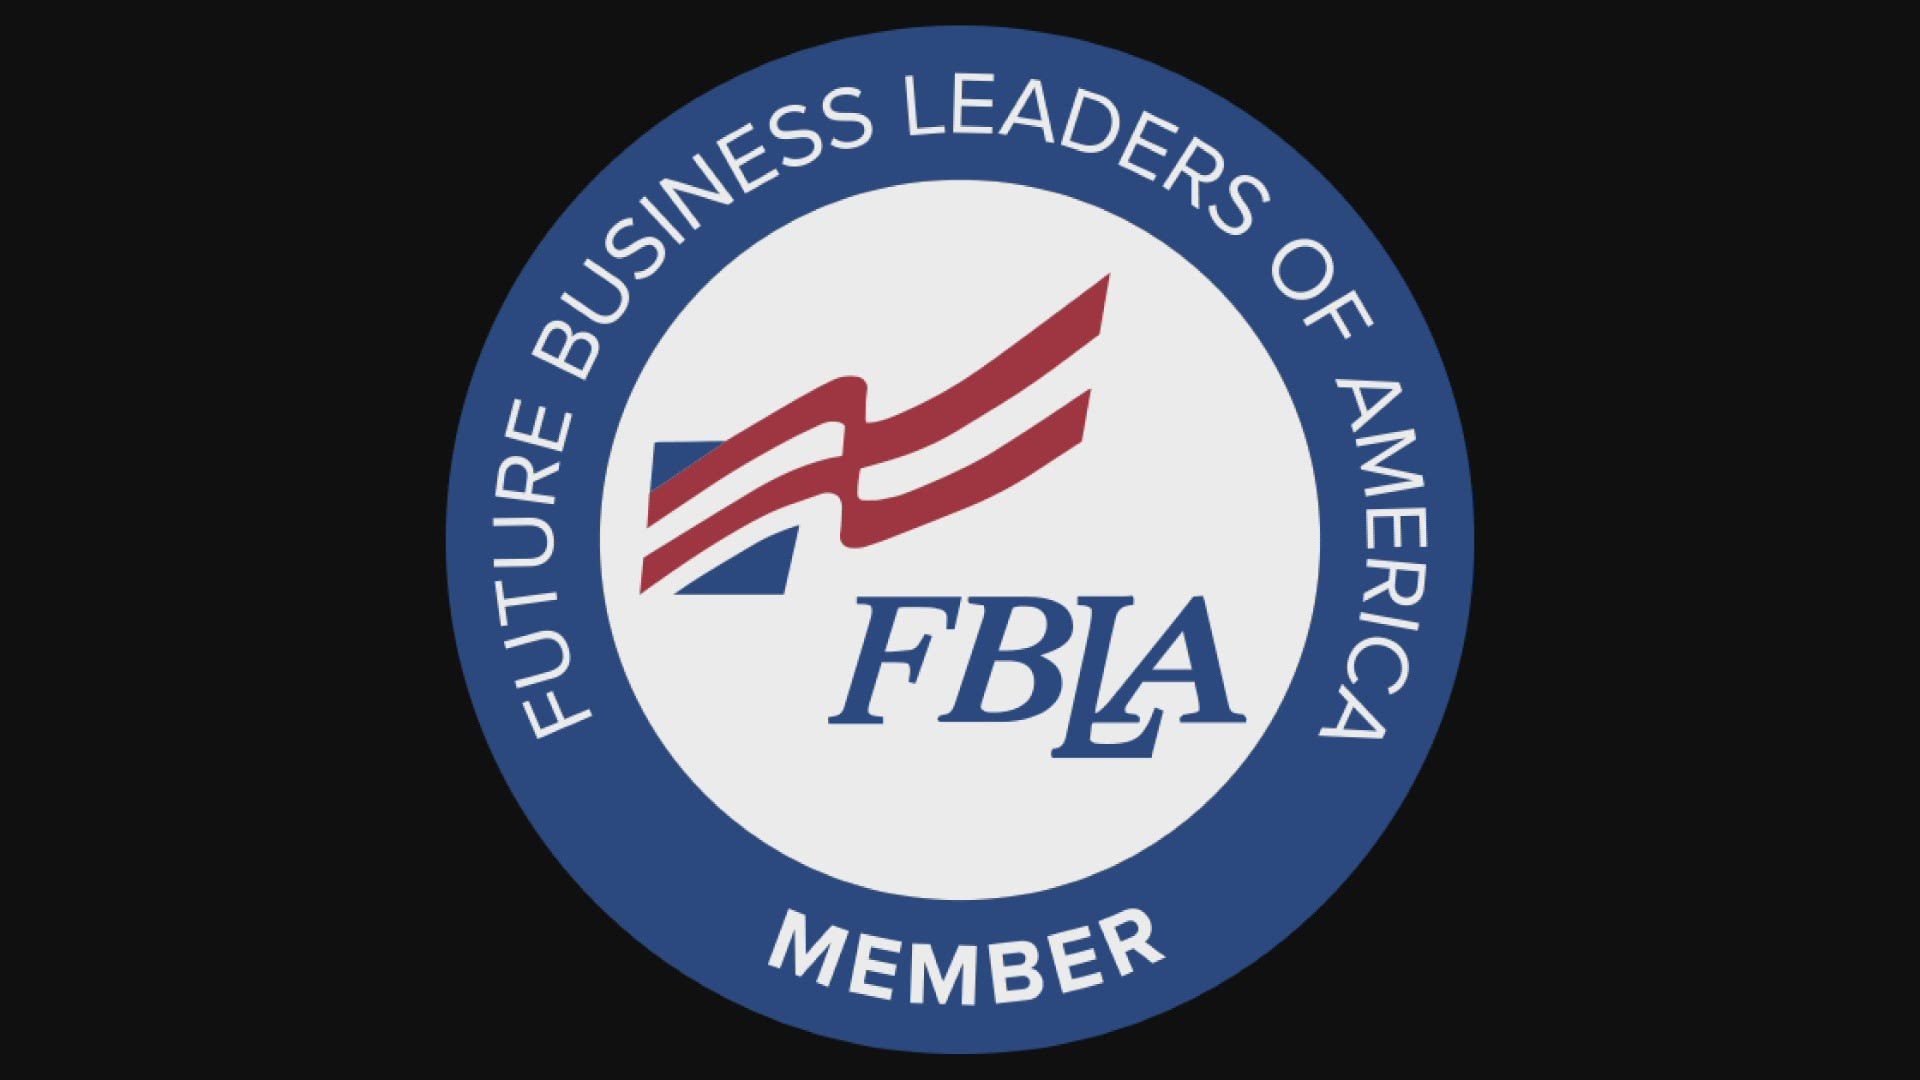 The Future Business Leaders of America are developing new policies for the safety of members and advisors.